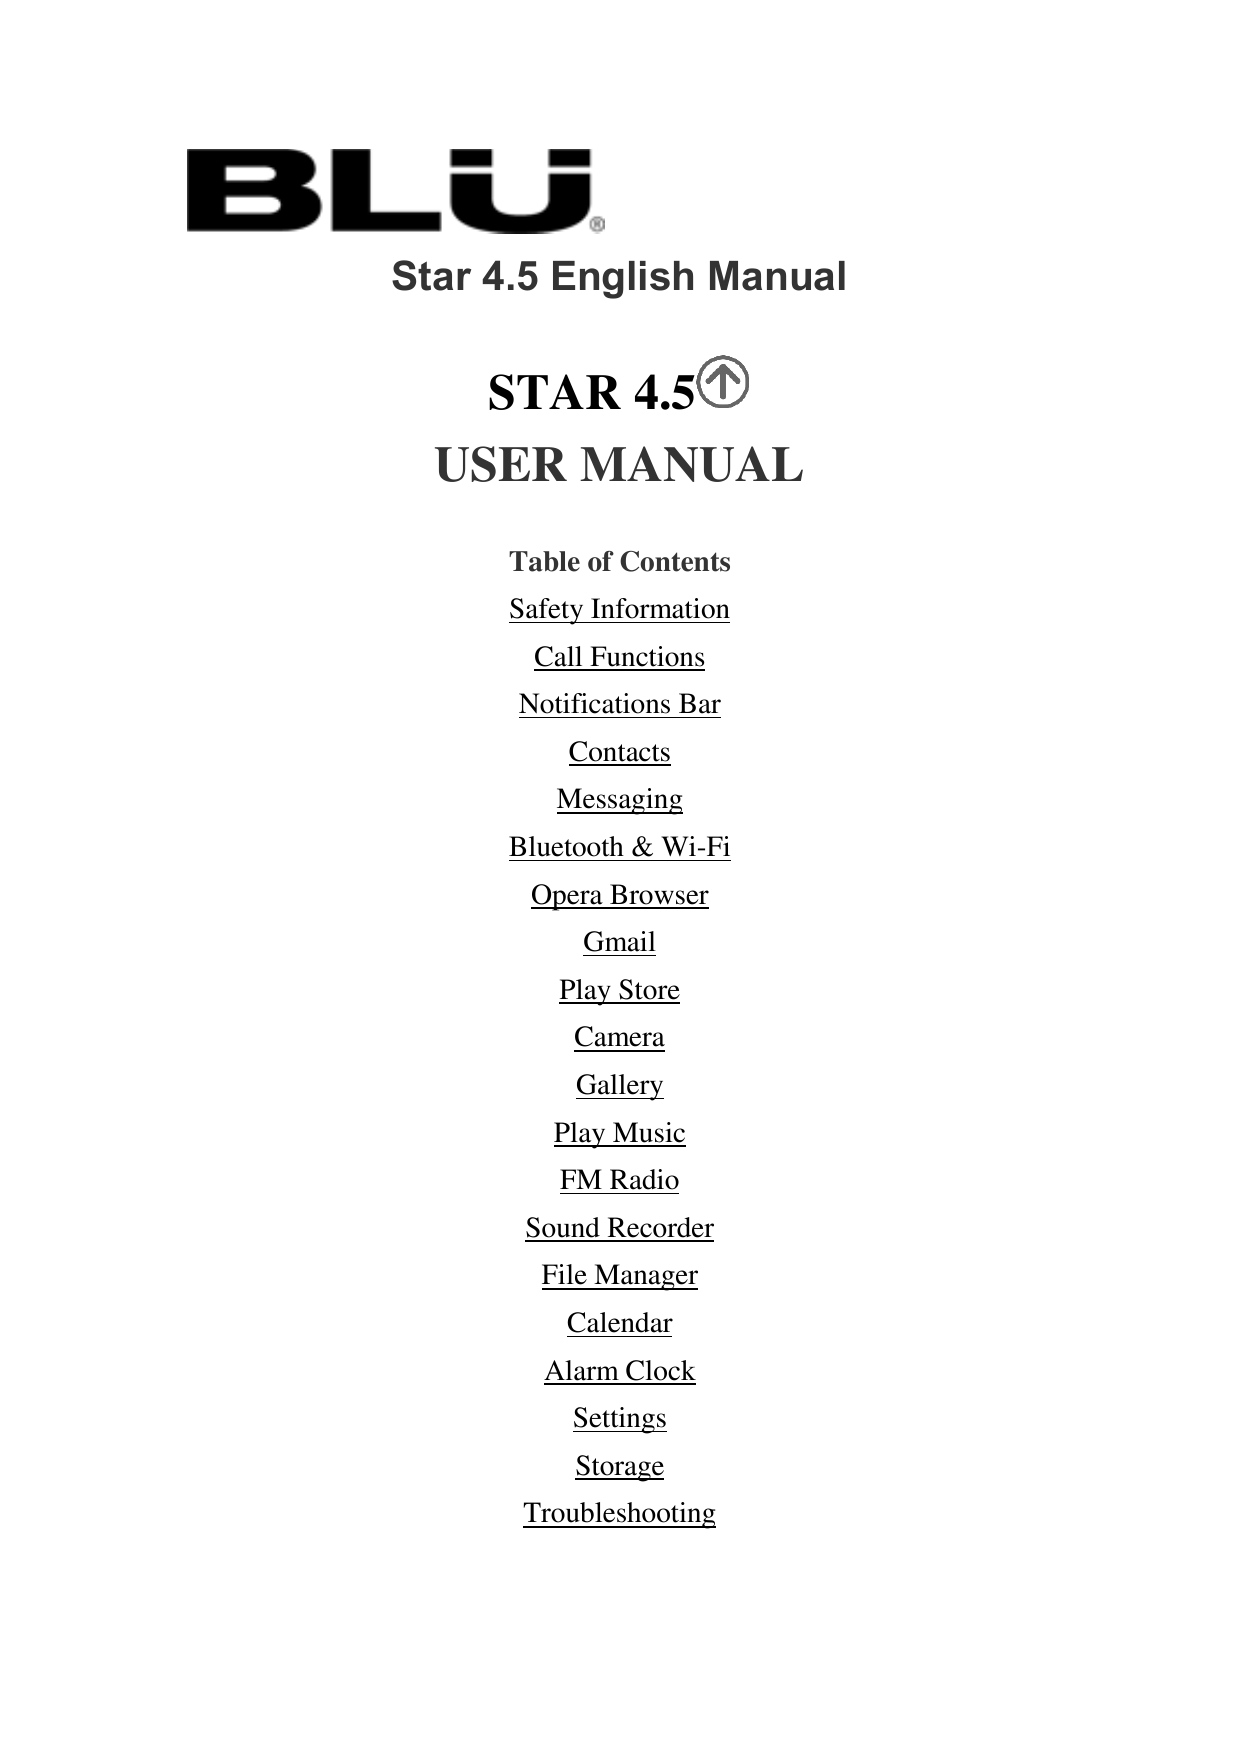 Star 4.5 English ManualSTAR 4.5USER MANUALTable of ContentsSafety InformationCall FunctionsNotifications BarContactsMessagingBlu